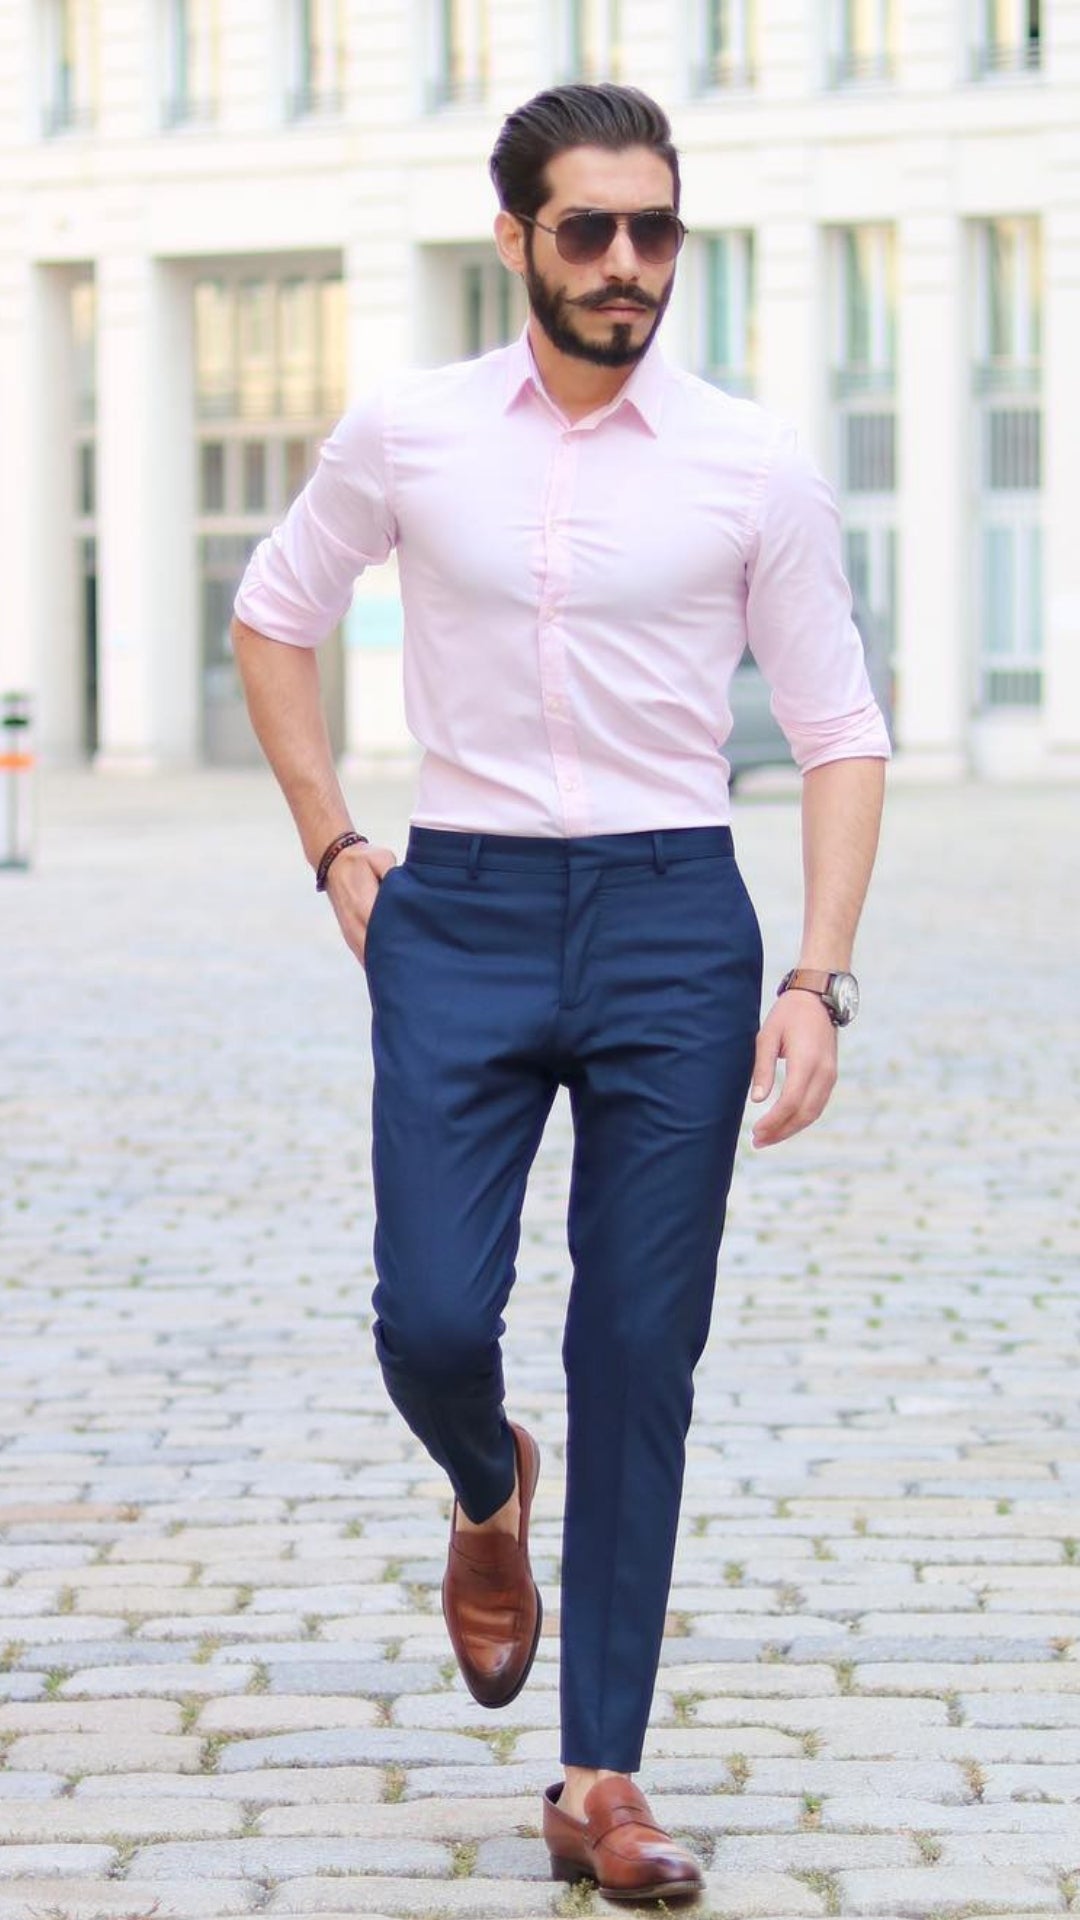 5 Best Shirt And Pant Combinations For Men #shirts #pants #mens #fashion